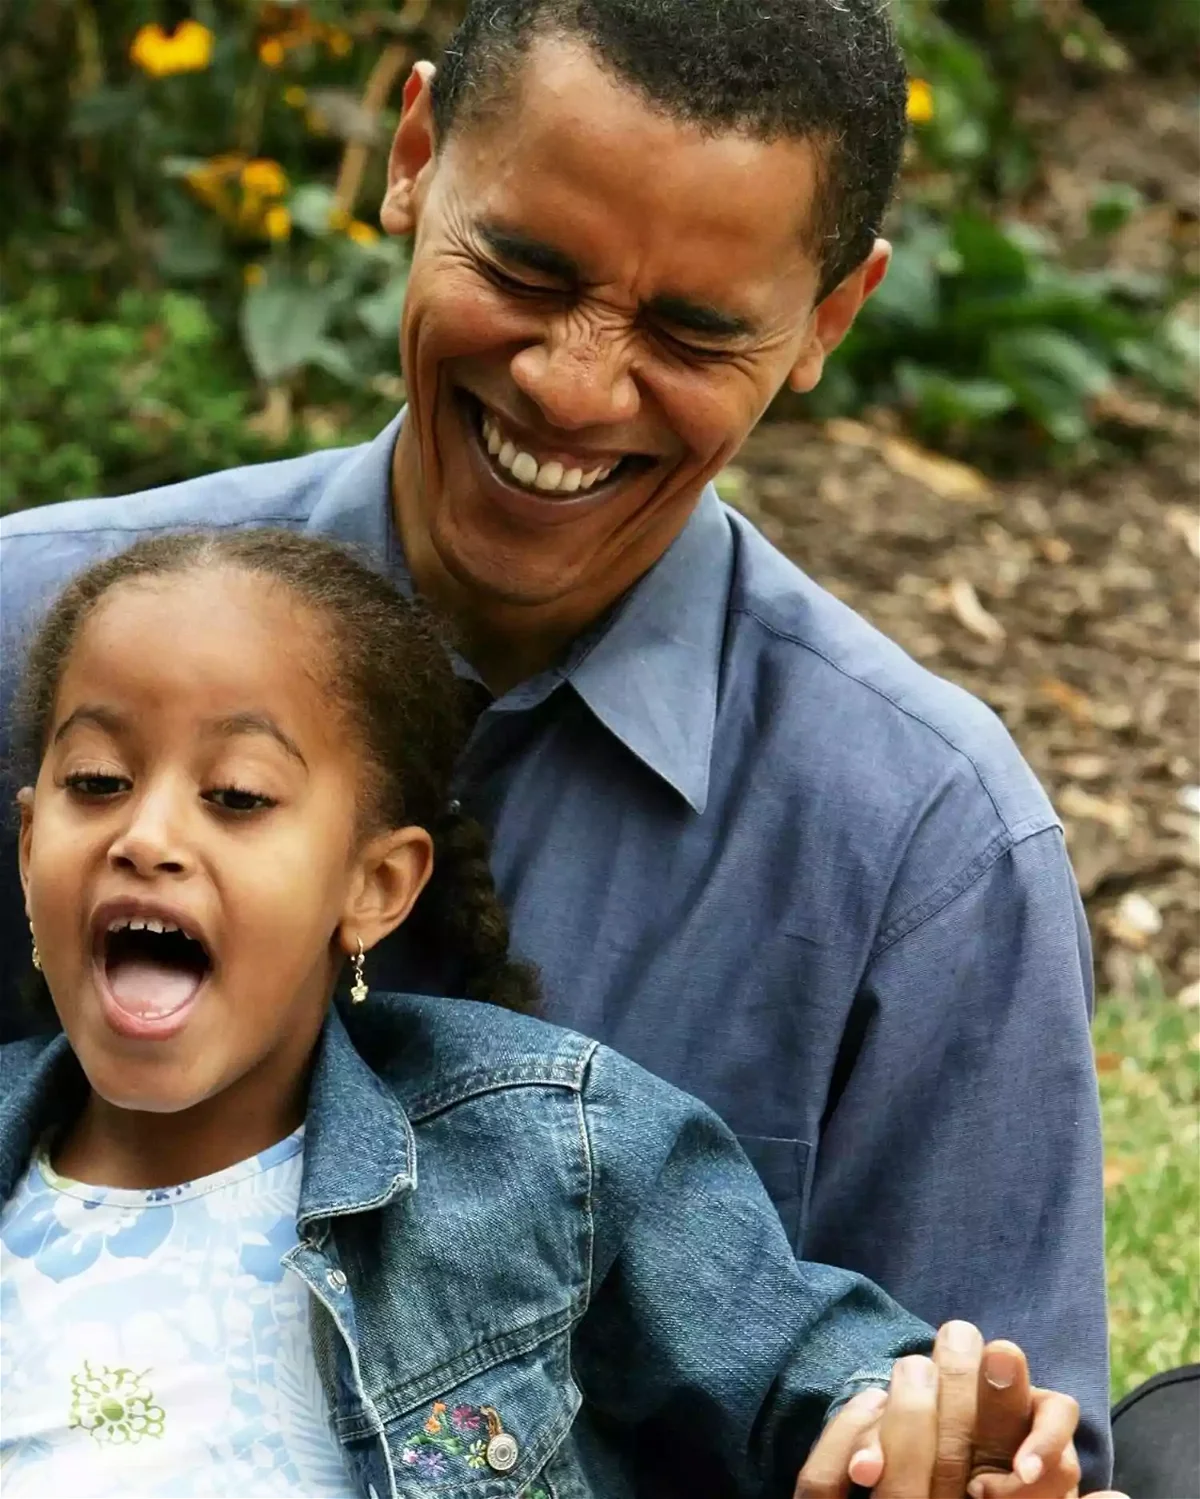 Obama Kids, Forehead, Smile, Hand, Photograph, Facial expression, Plant, Organ, Human, Happy, Gesture